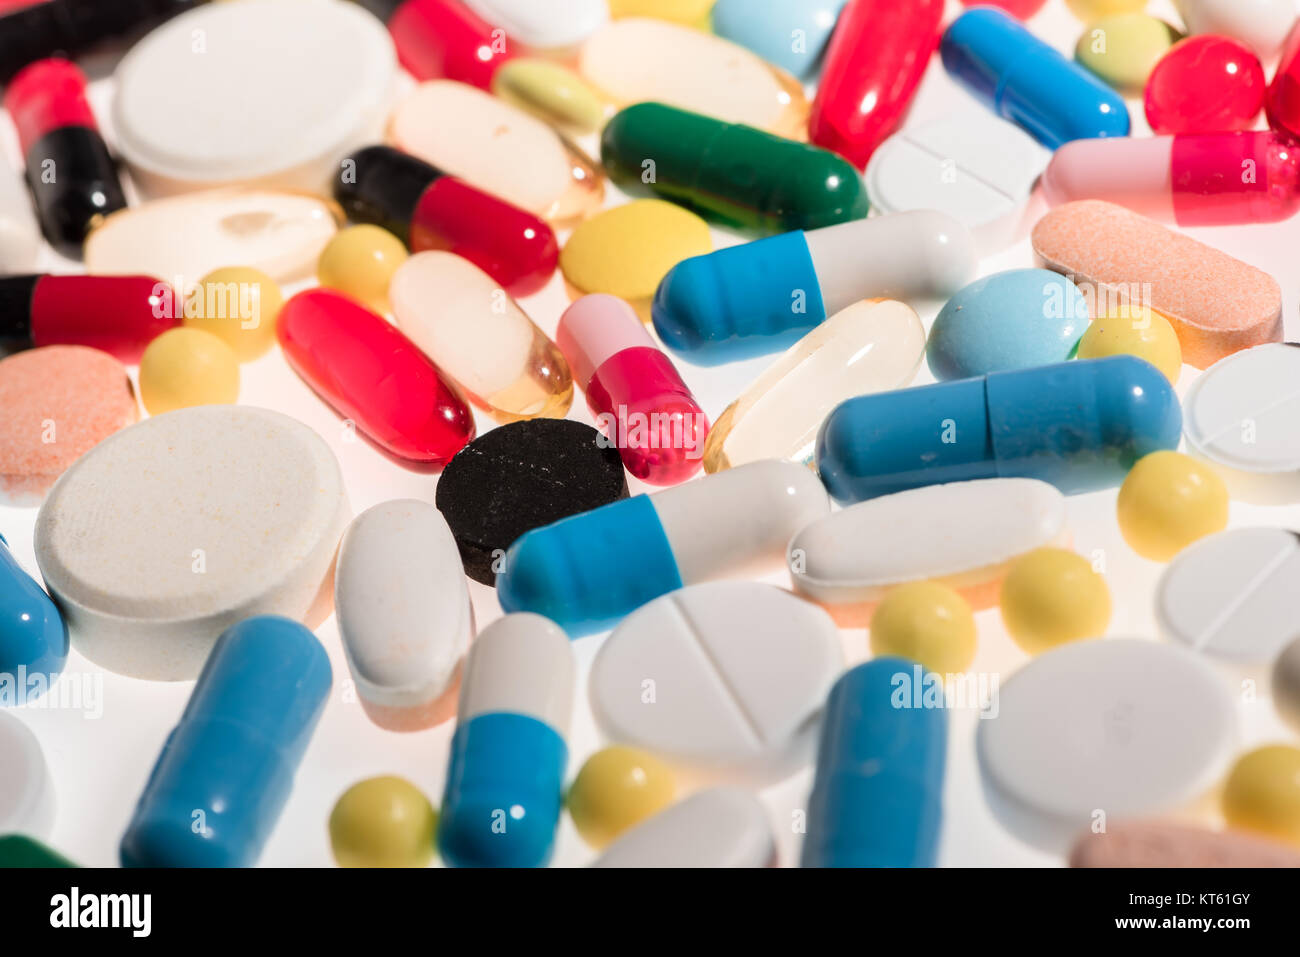 Close-up view of colorful medical pills and capsules, medicine and healthcare concept Stock Photo